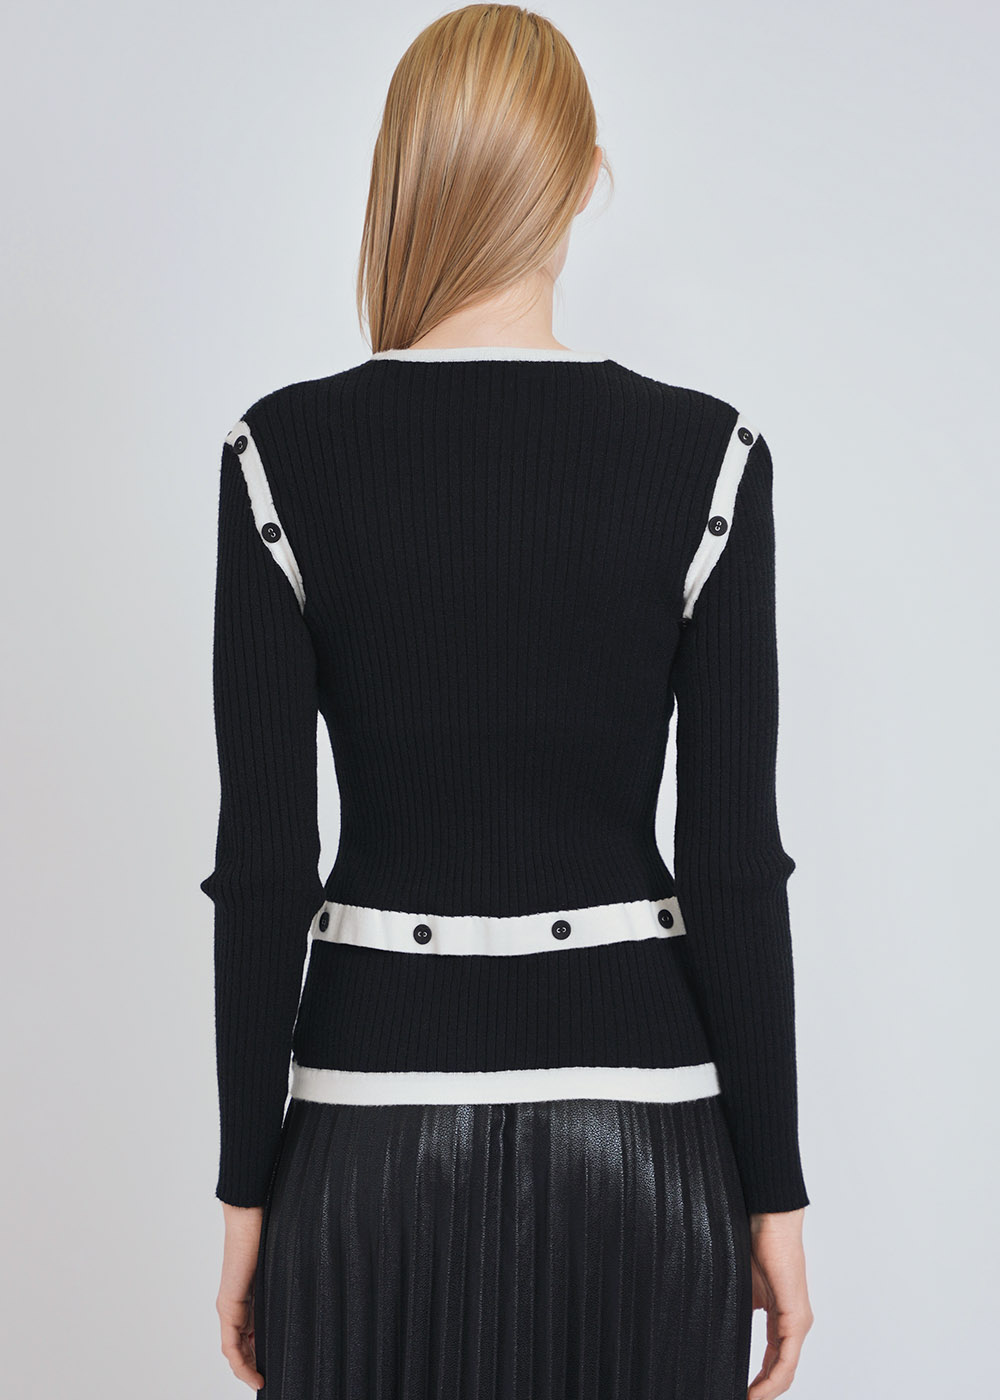 Classic Elegance: Black Ribbed Knit with White Buttoned Bands